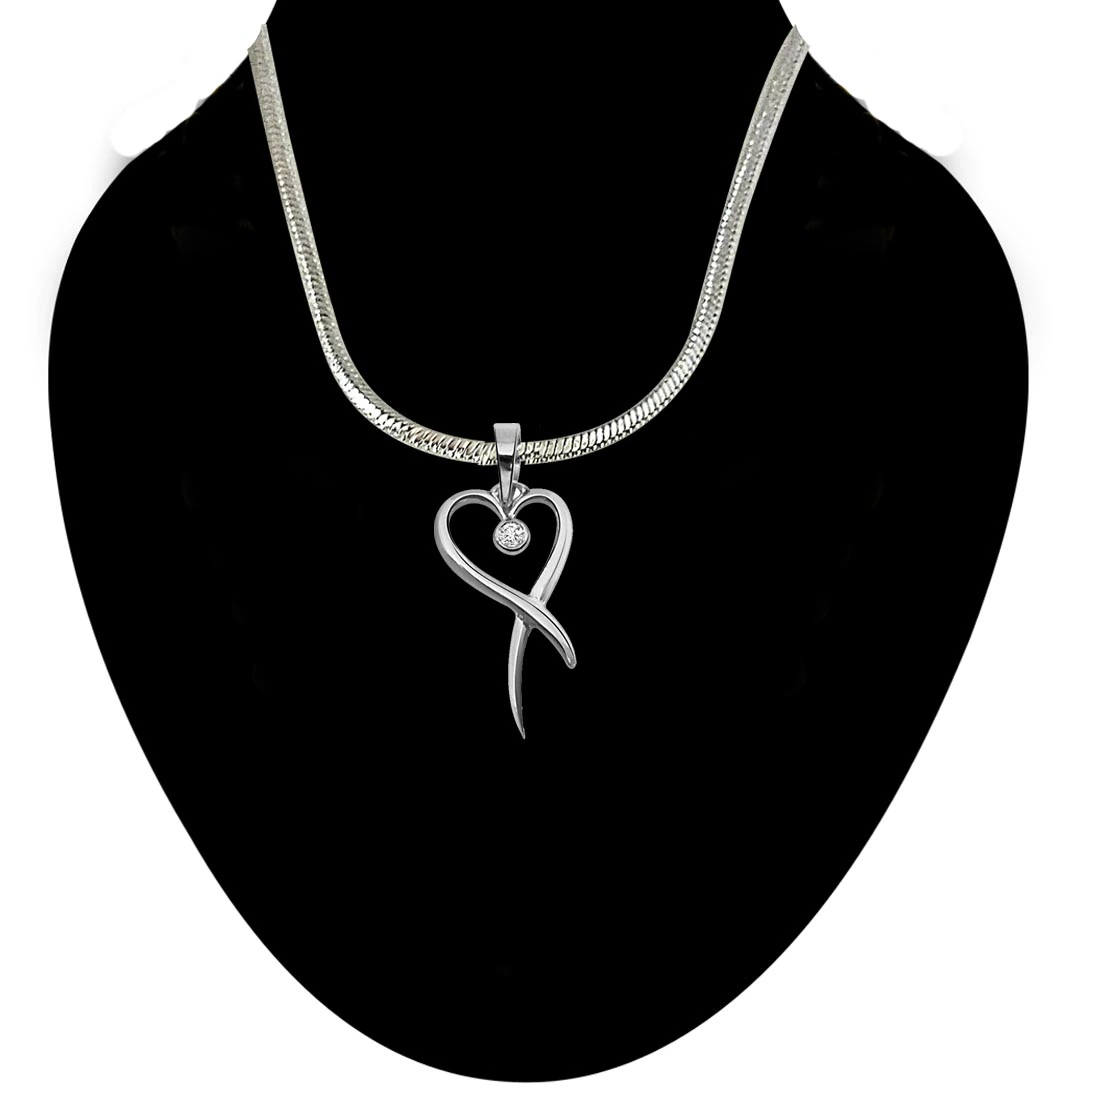 Holder of Love - Real Diamond & Sterling Silver Pendant with 18 IN Chain (SDP43)